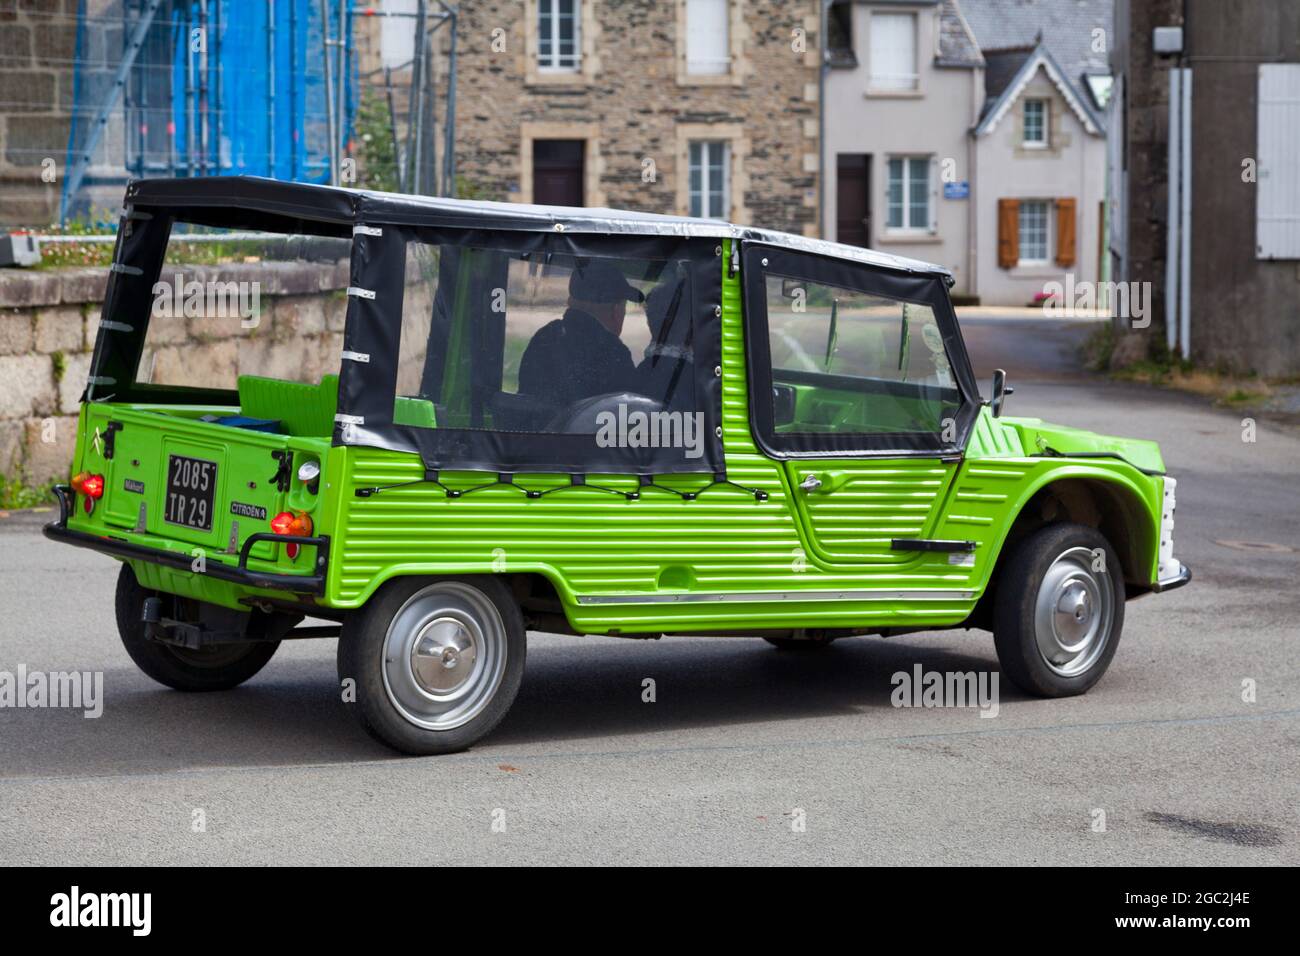 Pleyber-Christ, France - July 04 2021: The Citroën Méhari is a lightweight utilitarian and recreational vehicle manufactured and marketed by Citroën f Stock Photo